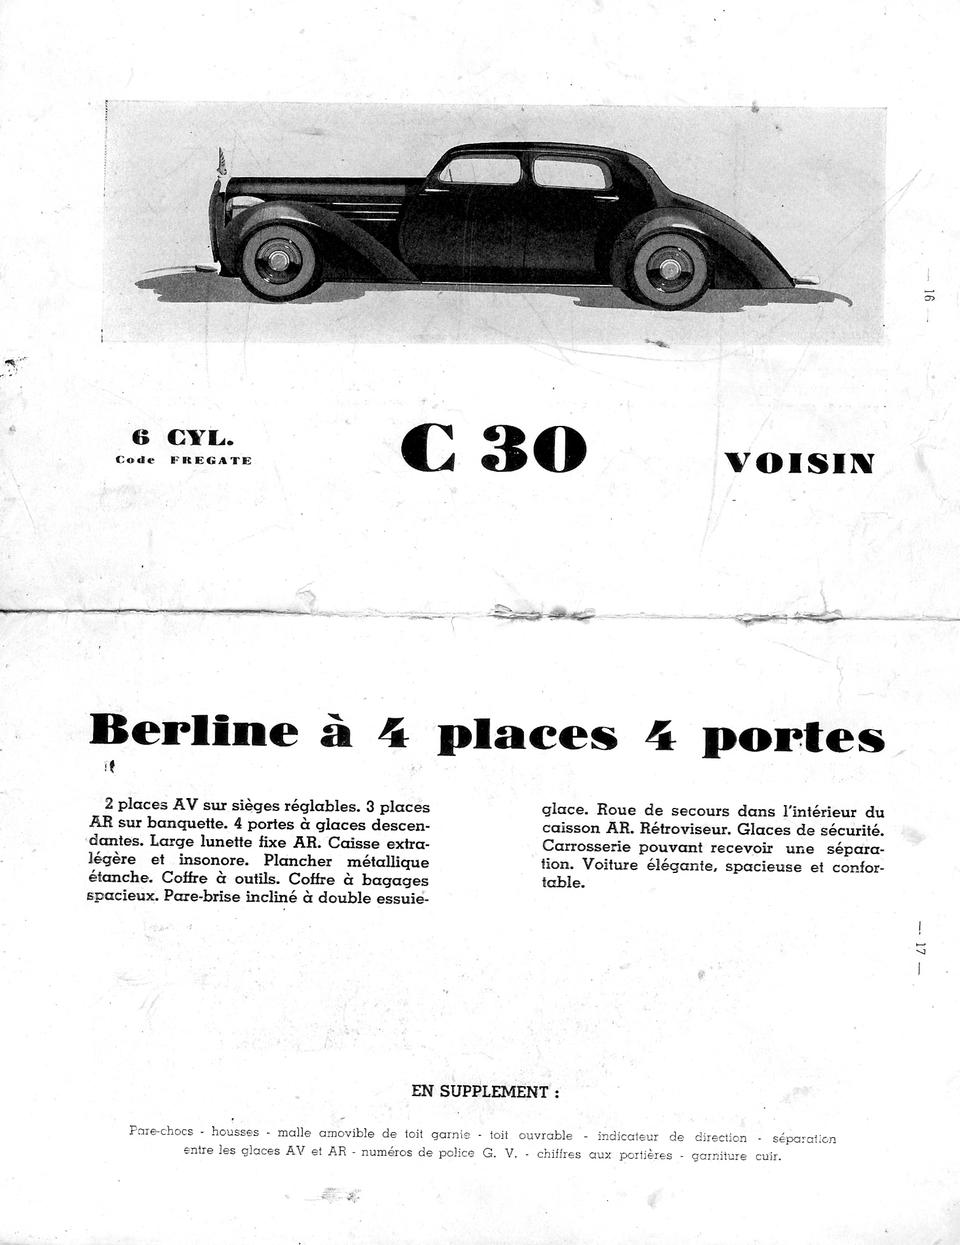 The final car designed by Gabriel Voisin,1939 Avions Voisin C30 S Coup&#233;  Chassis no. 60026